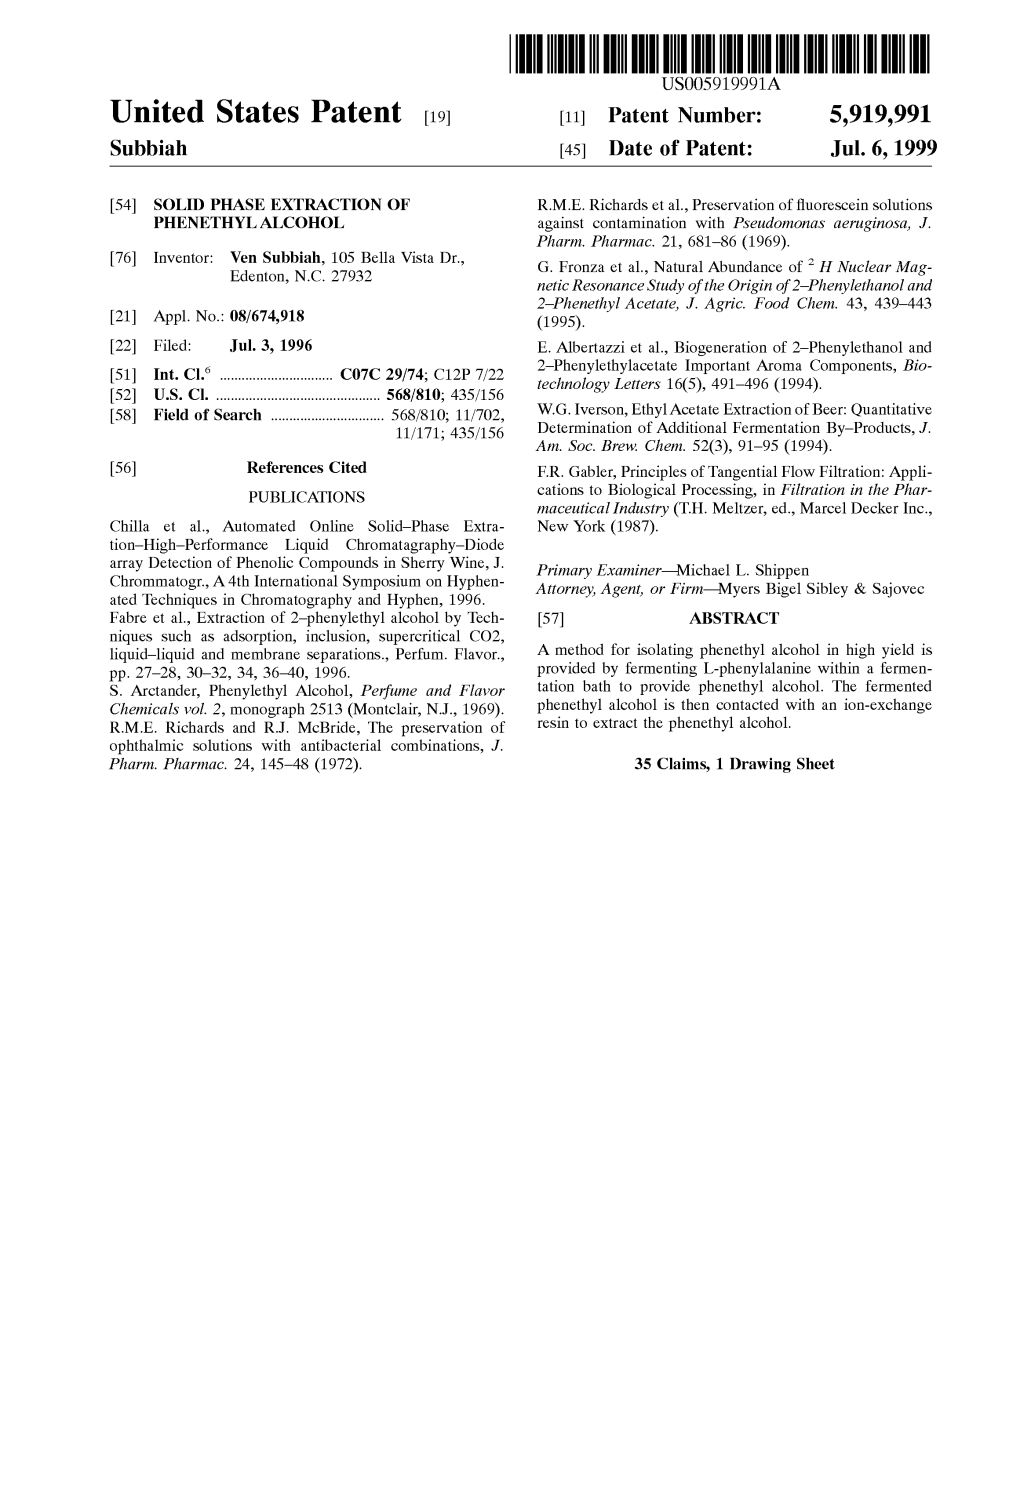 United States Patent (19) 11 Patent Number: 5,919,991 Subbiah (45) Date of Patent: Jul